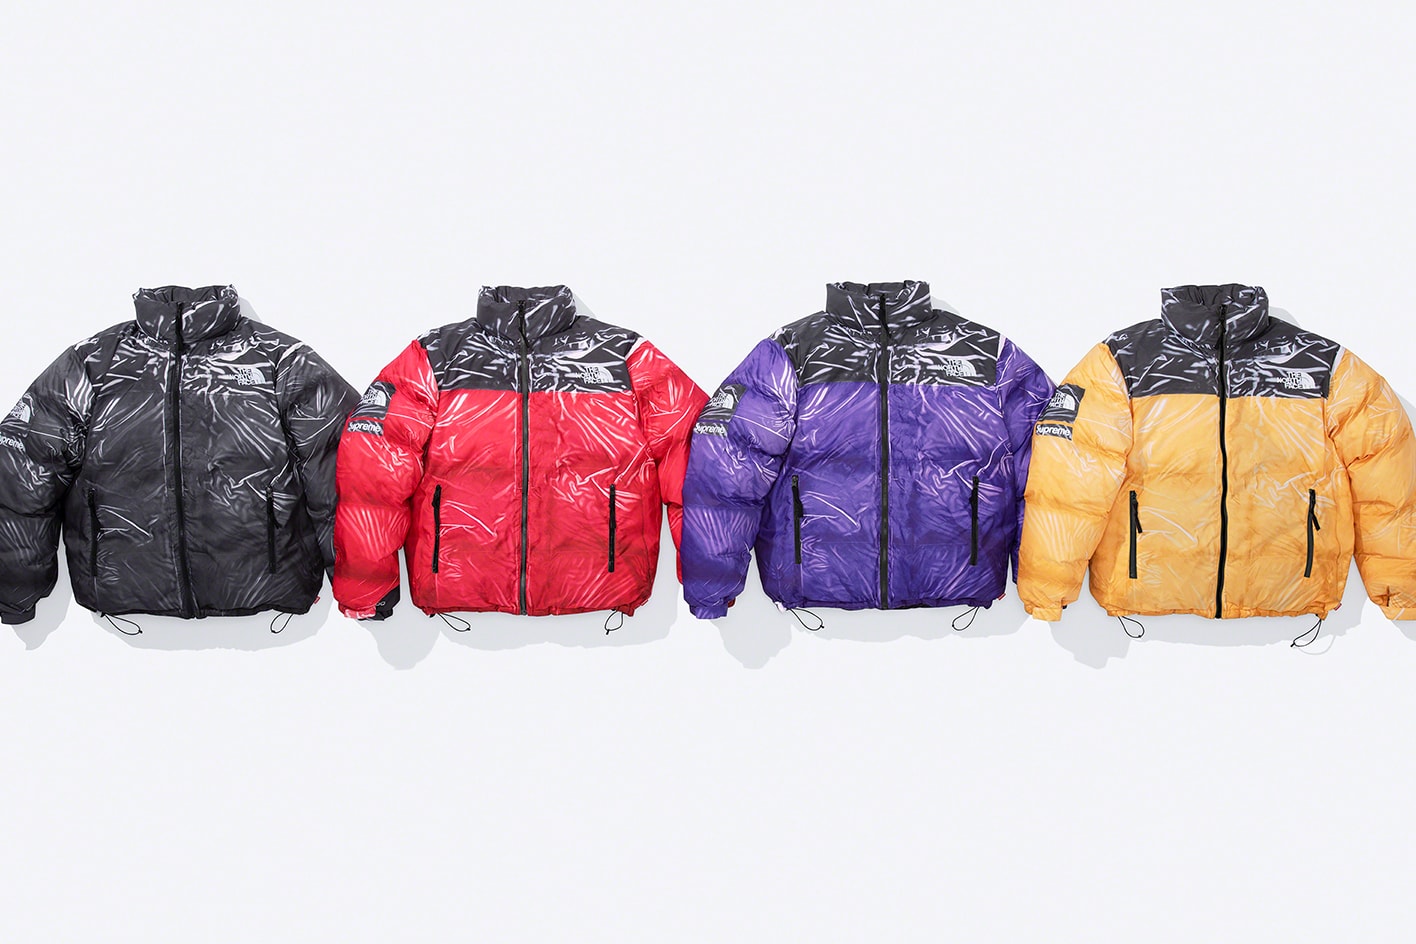 Supreme®/The North Face®. 03/09/2023 Supreme has worked with The North Face®  on a new collection for Spring 2023. The collection consists…